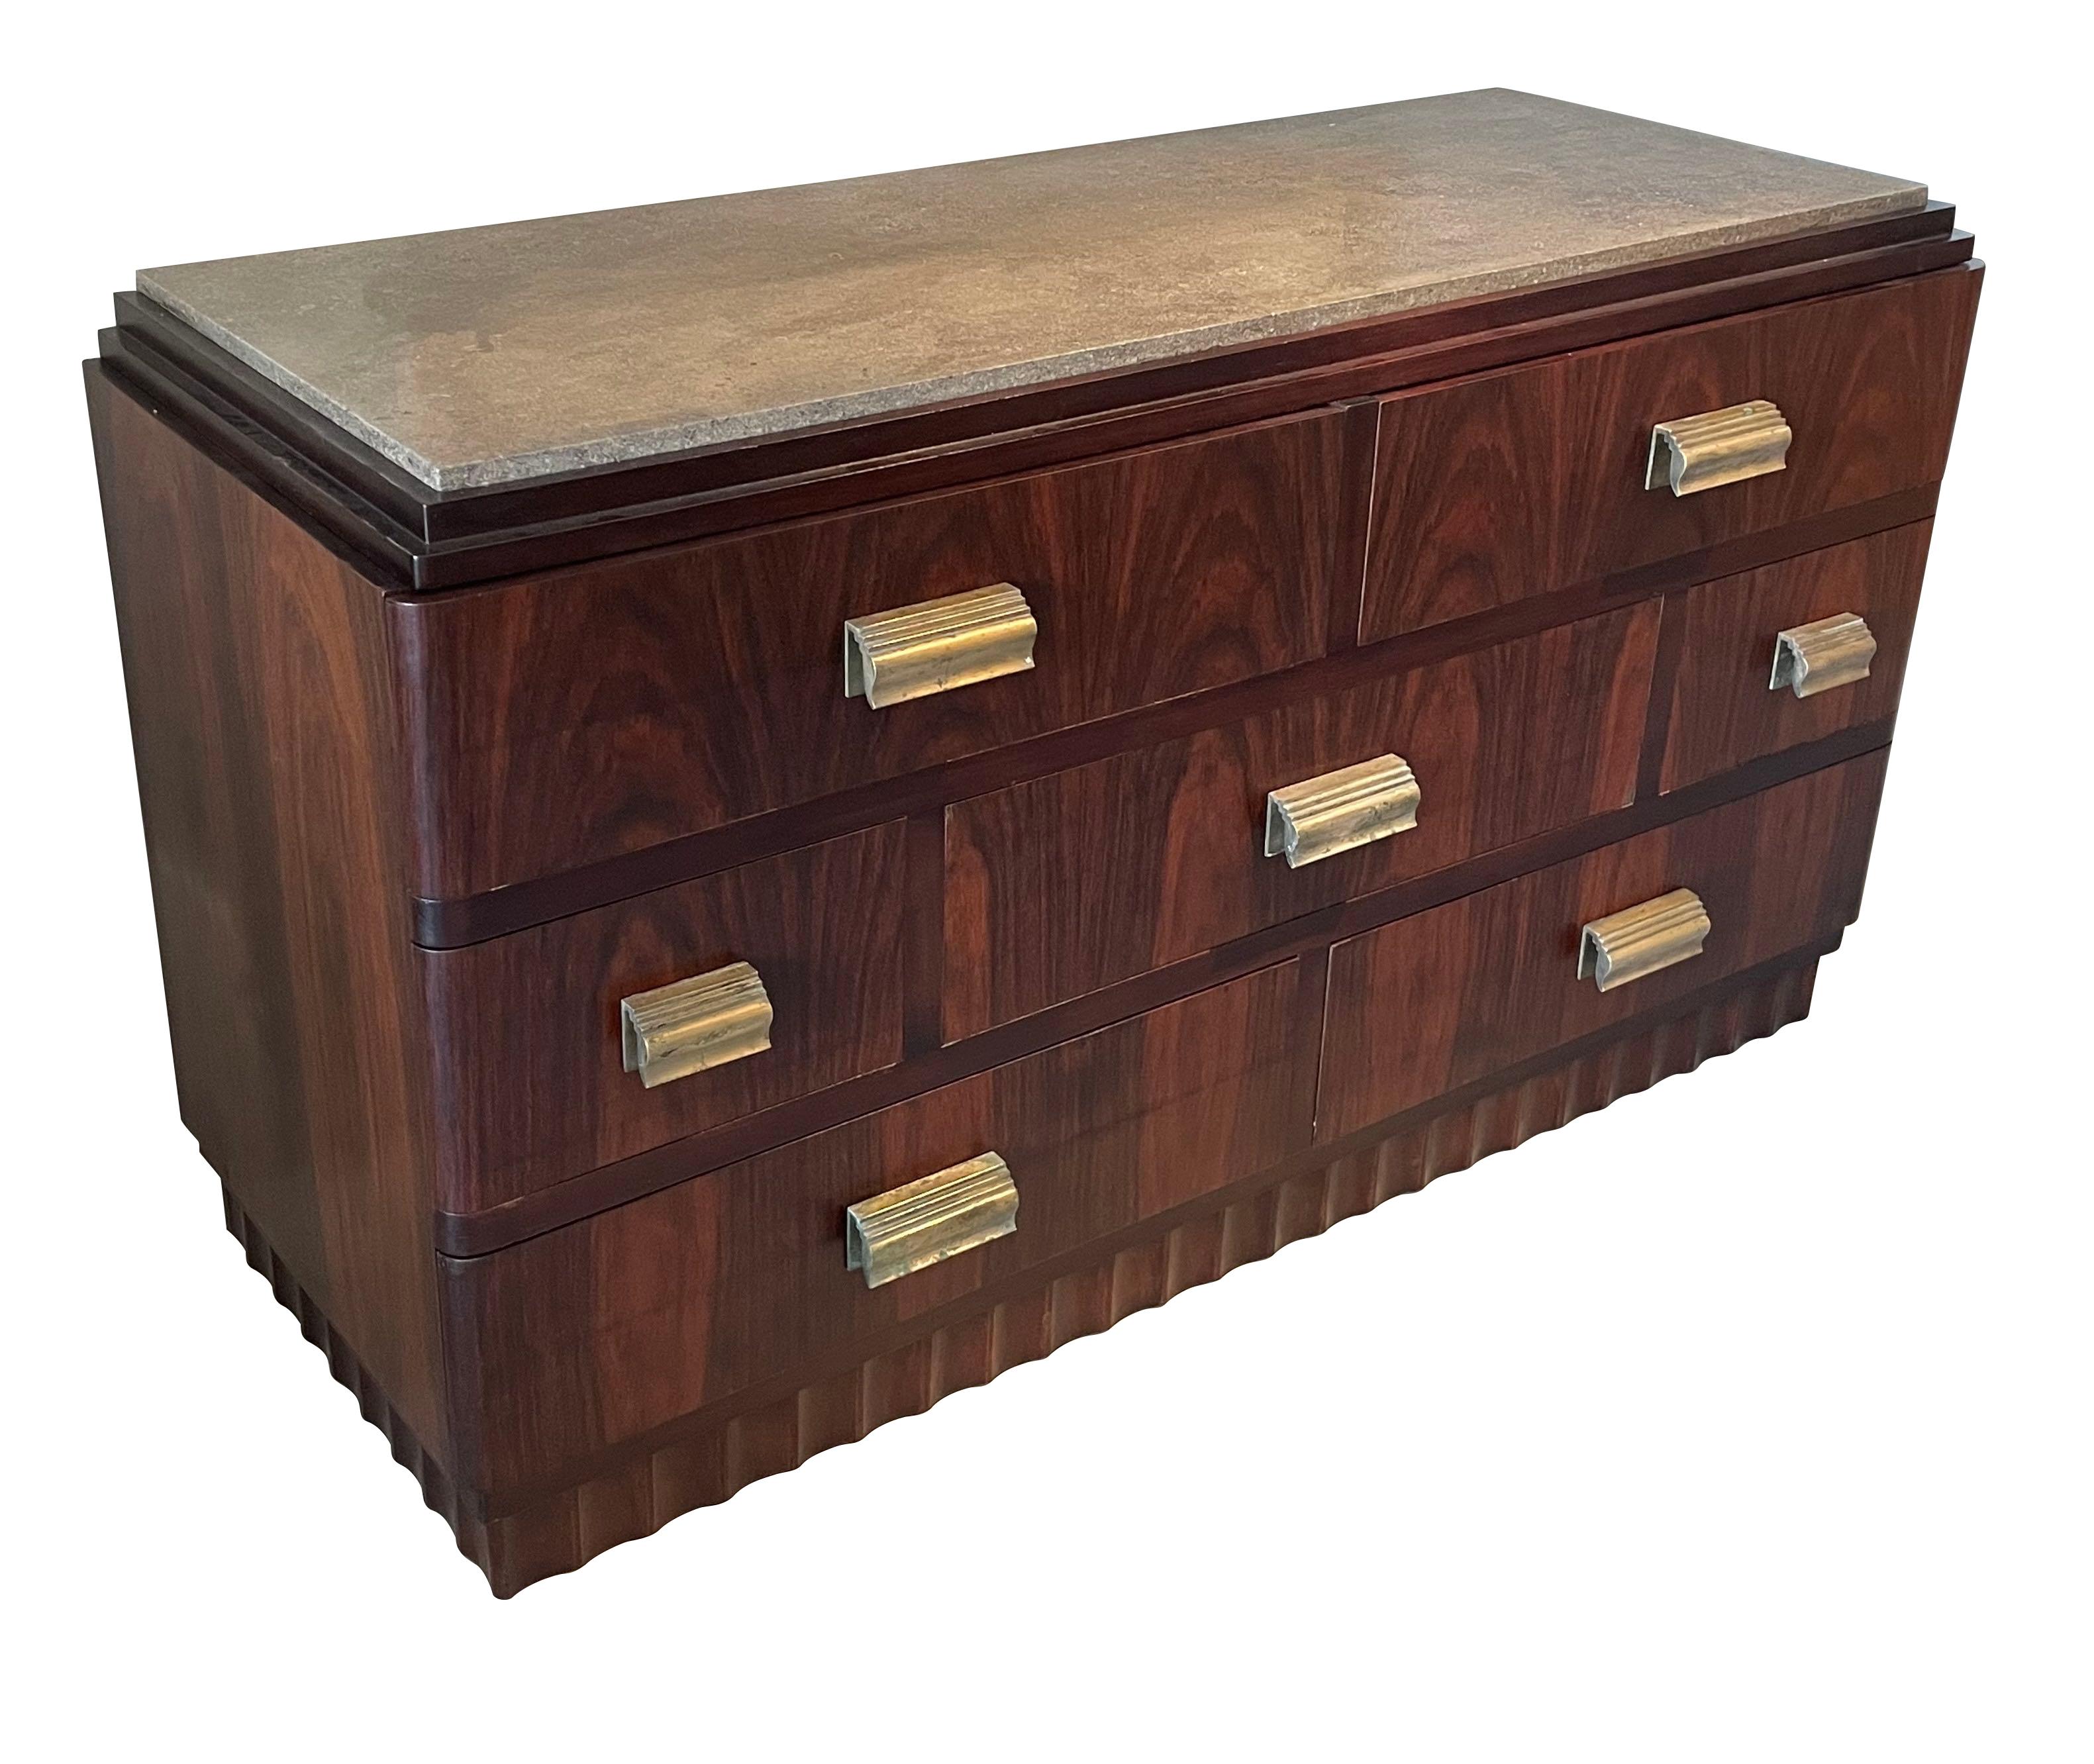 1930's French commode designed by Christian Krass.
Marble top.
Seven drawers with original cast bronze hardware.
Polished walnut with decorative grain. 
Wavy designed base.
ARRIVING AUGUST.